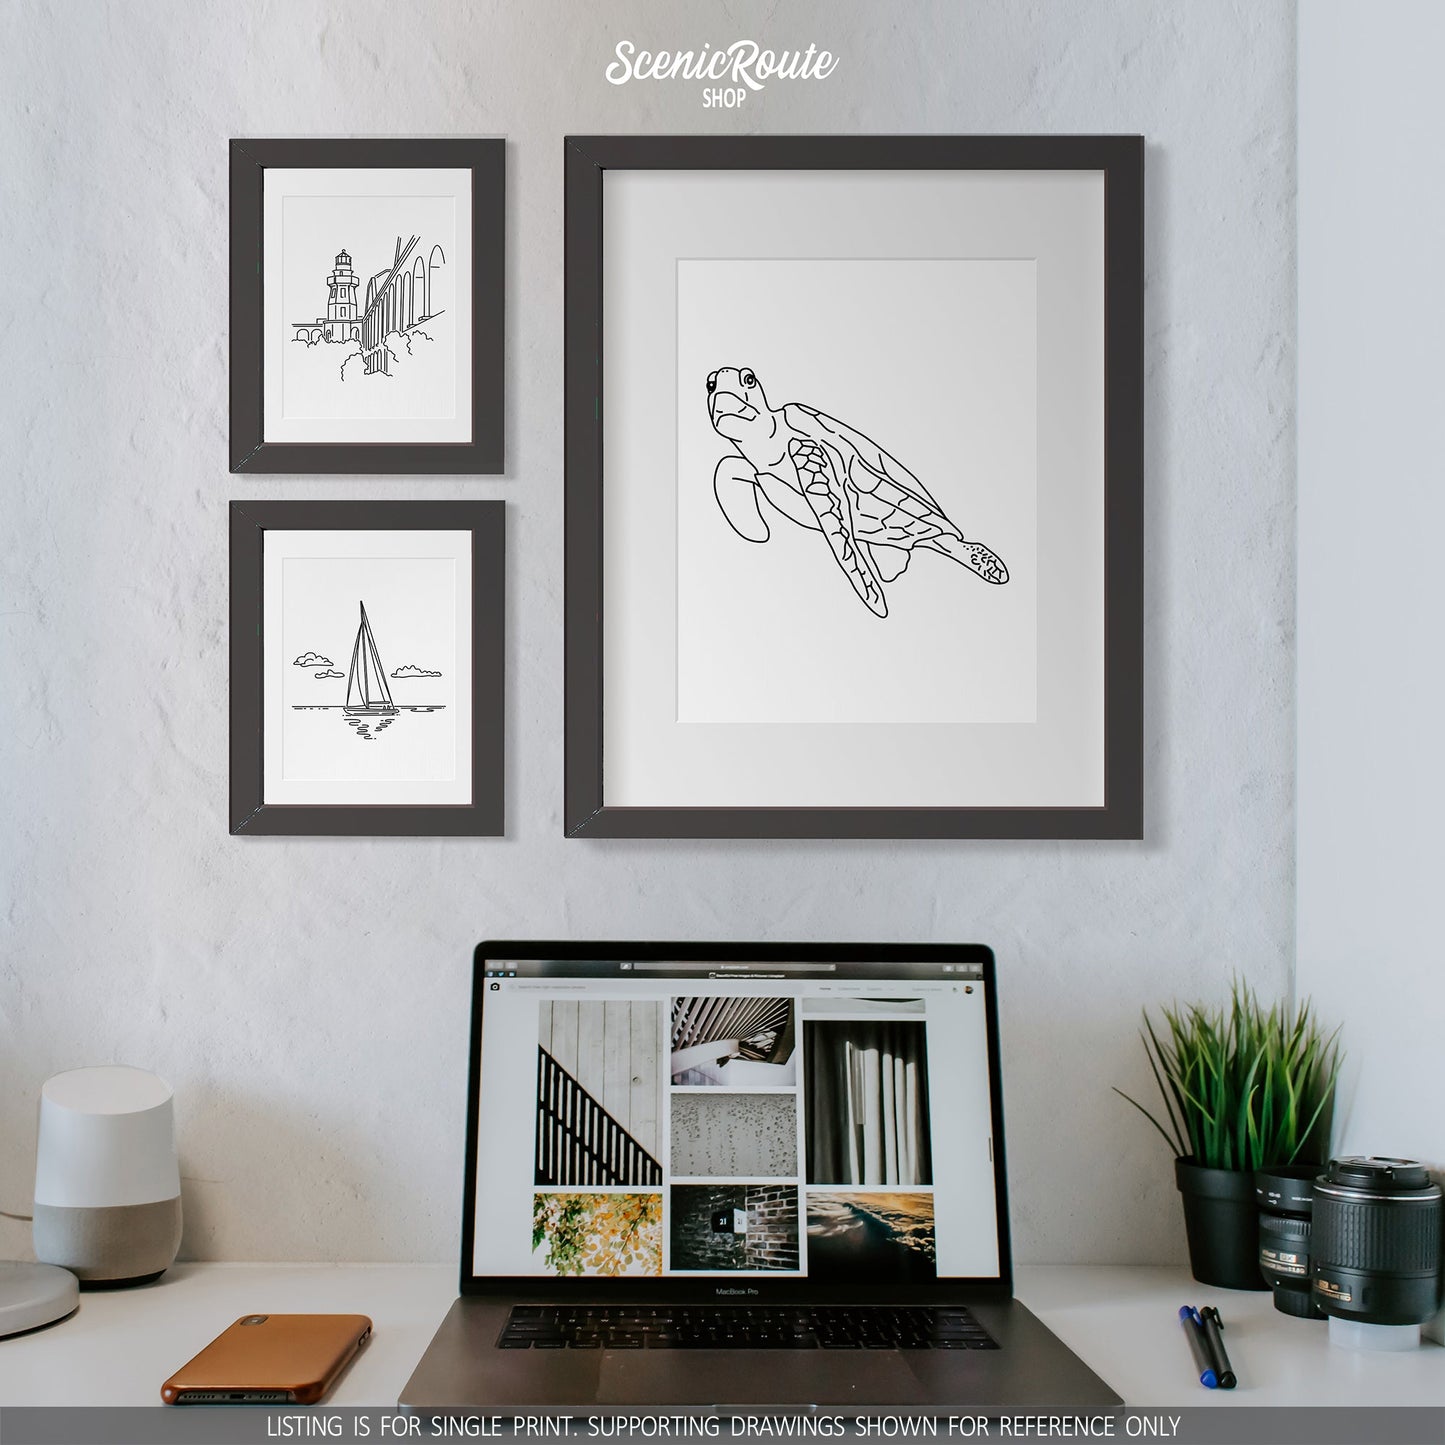 A group of three framed drawings on a white wall above a desk and laptop. The line art drawings include Dry Tortugas National Park, Sailing, and a Sea Turtle